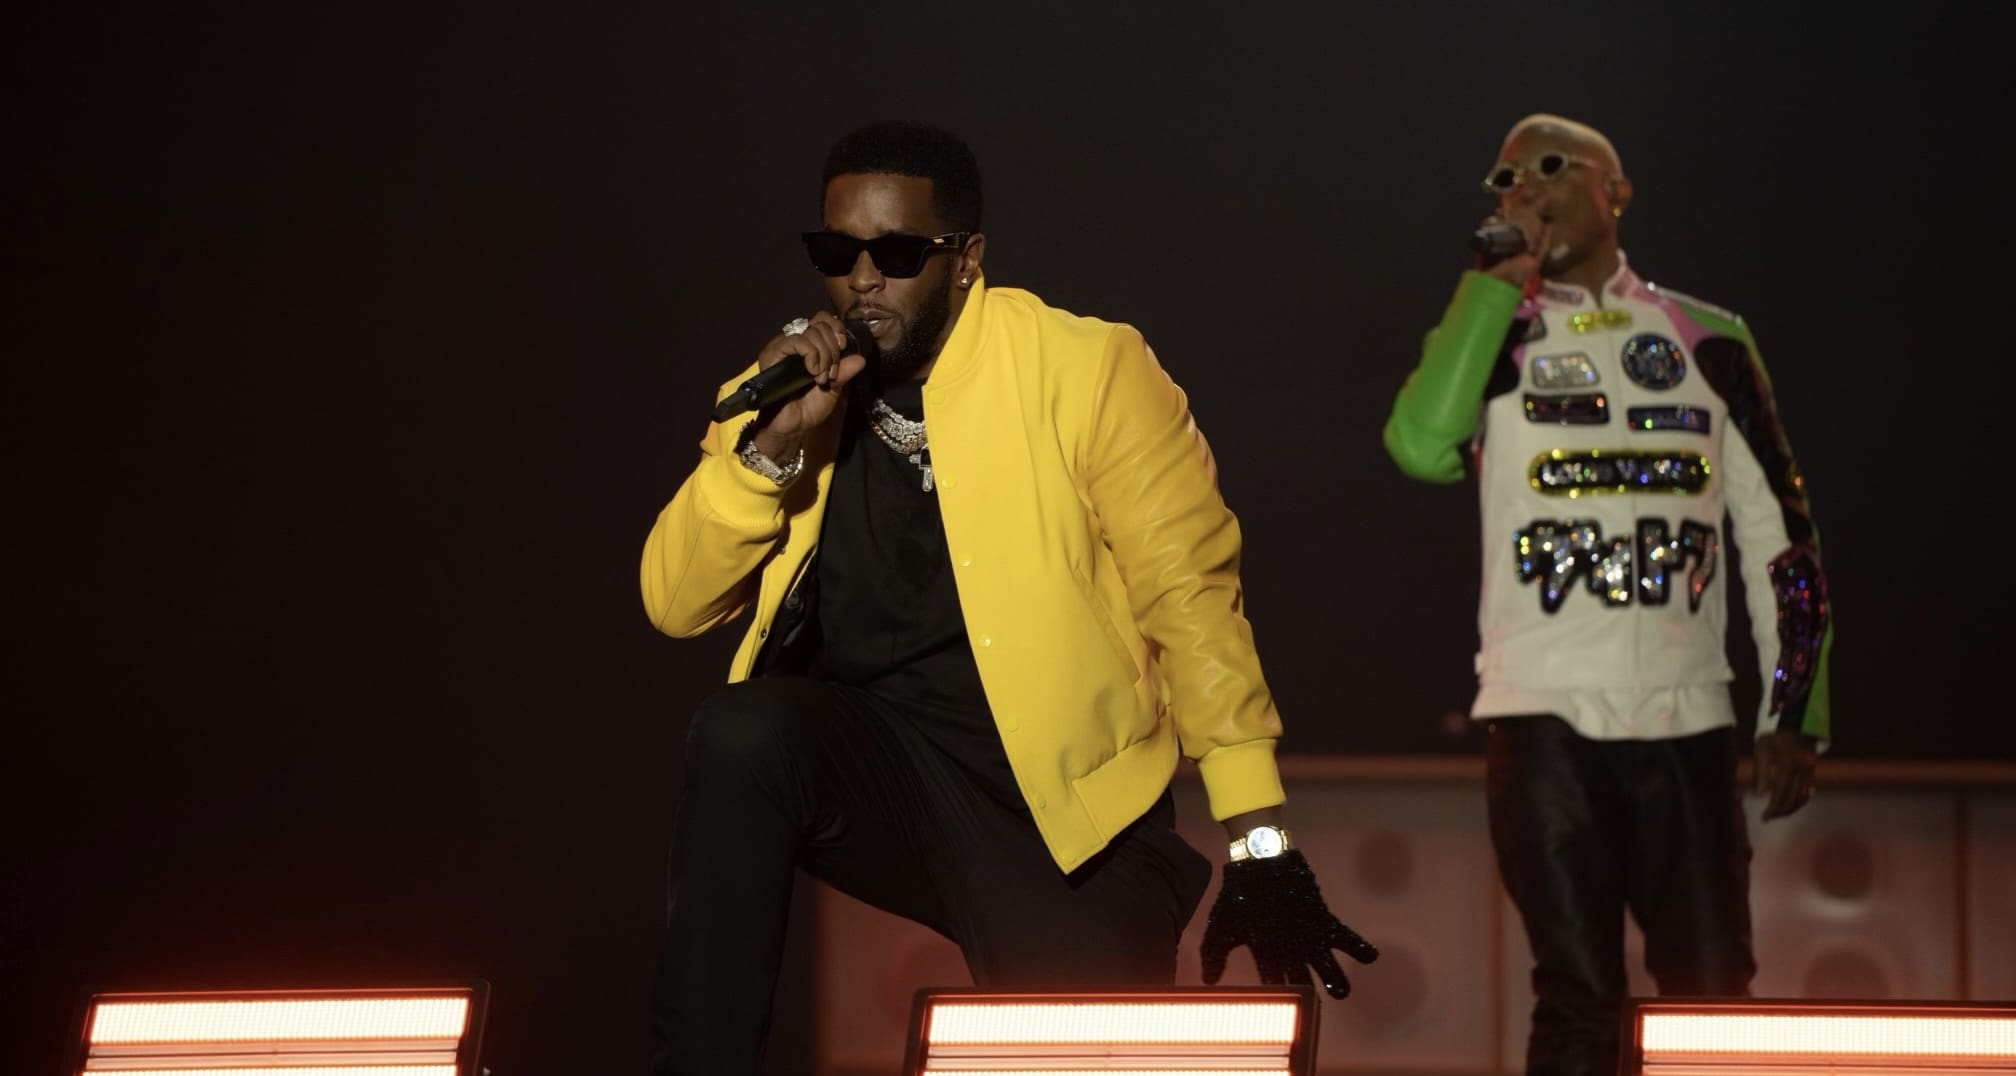 Diddy’s Surprise ‘Something In The Water’ Festival Performance Featured A Lyric Change Showcasing His Marketing Genius [Video]